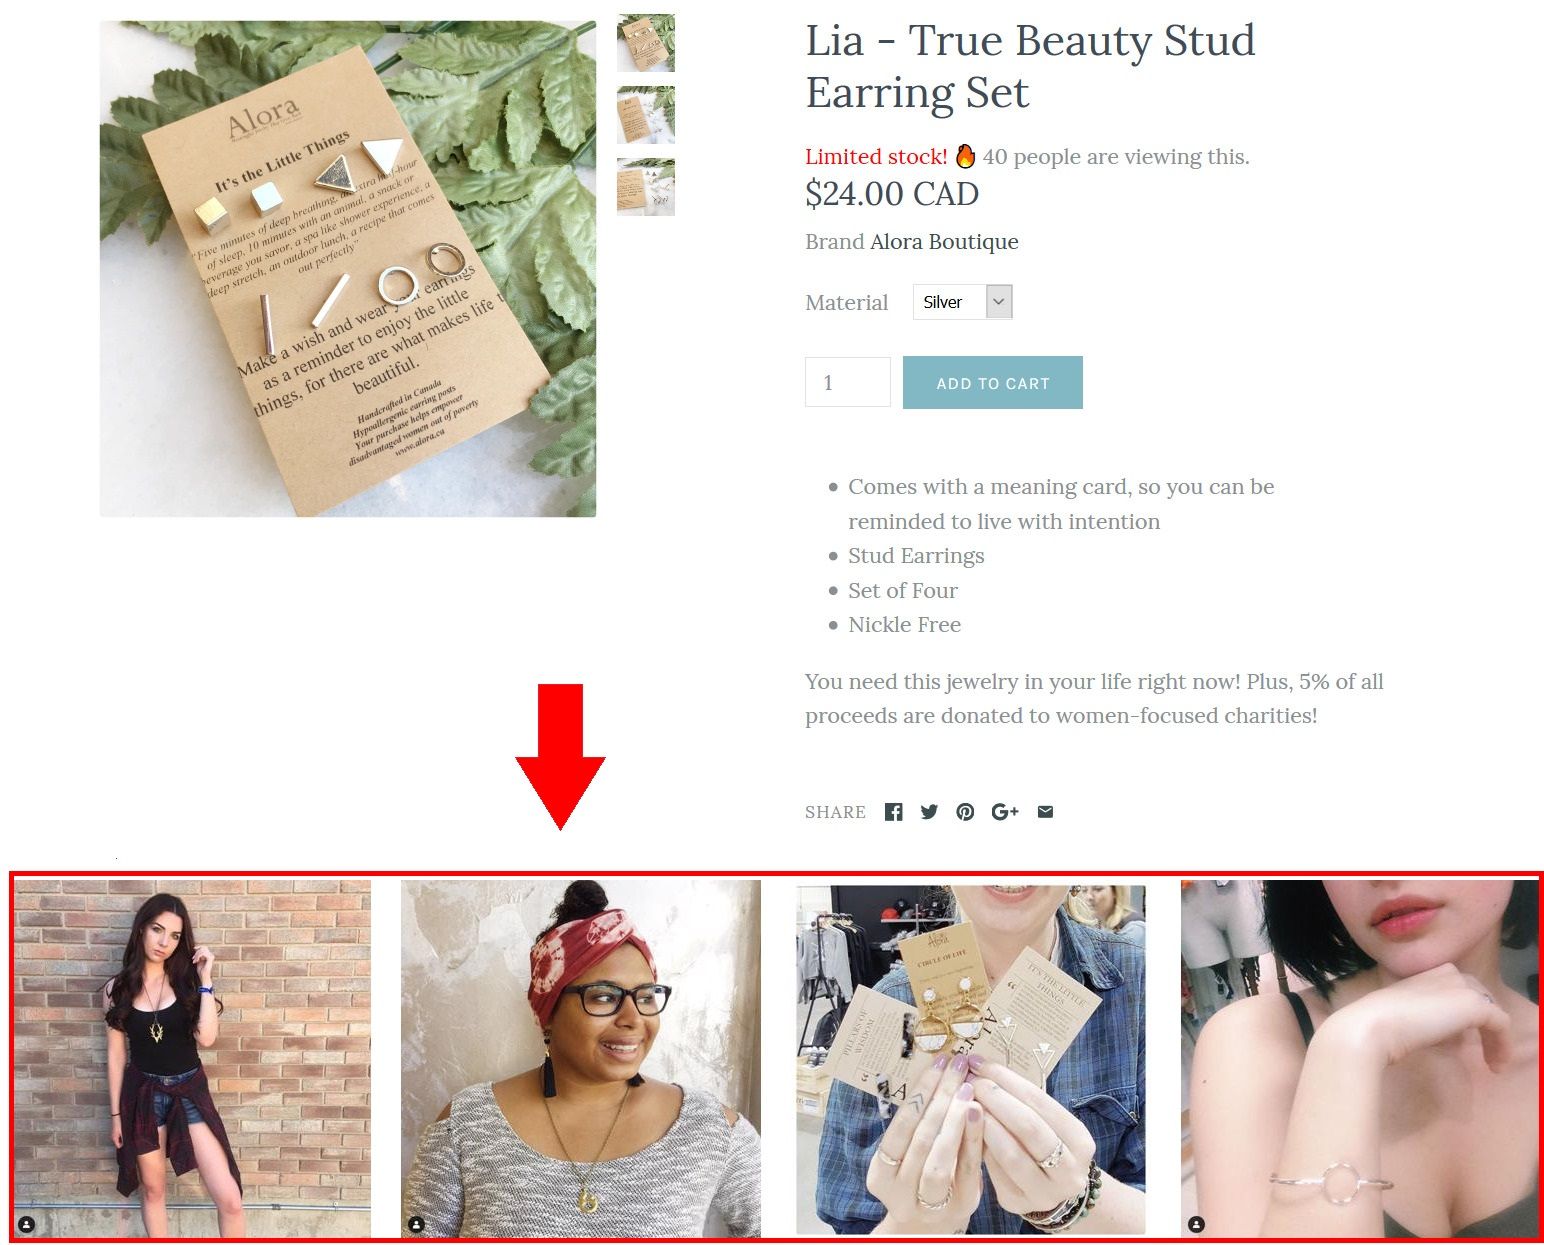 Showcasing-social-proof-photo-reviews-in-online-store